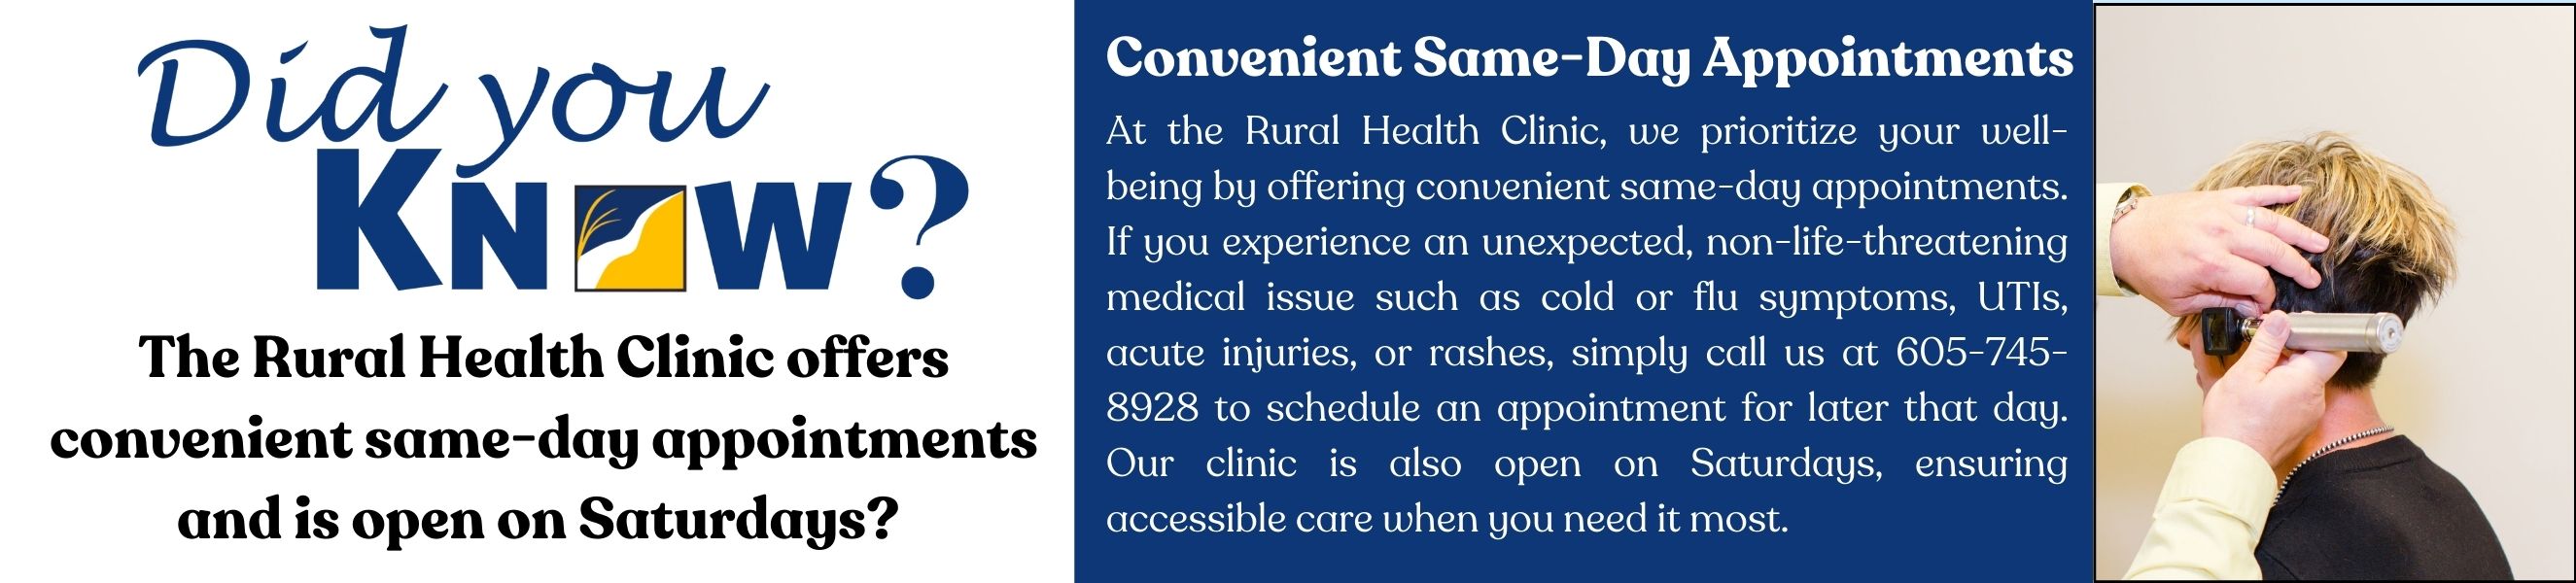 The Rural Health Clinic offers convenient same-day appointments and is open on Saturday. Convenient Same-Day Appointments.  Call 605-745-8928